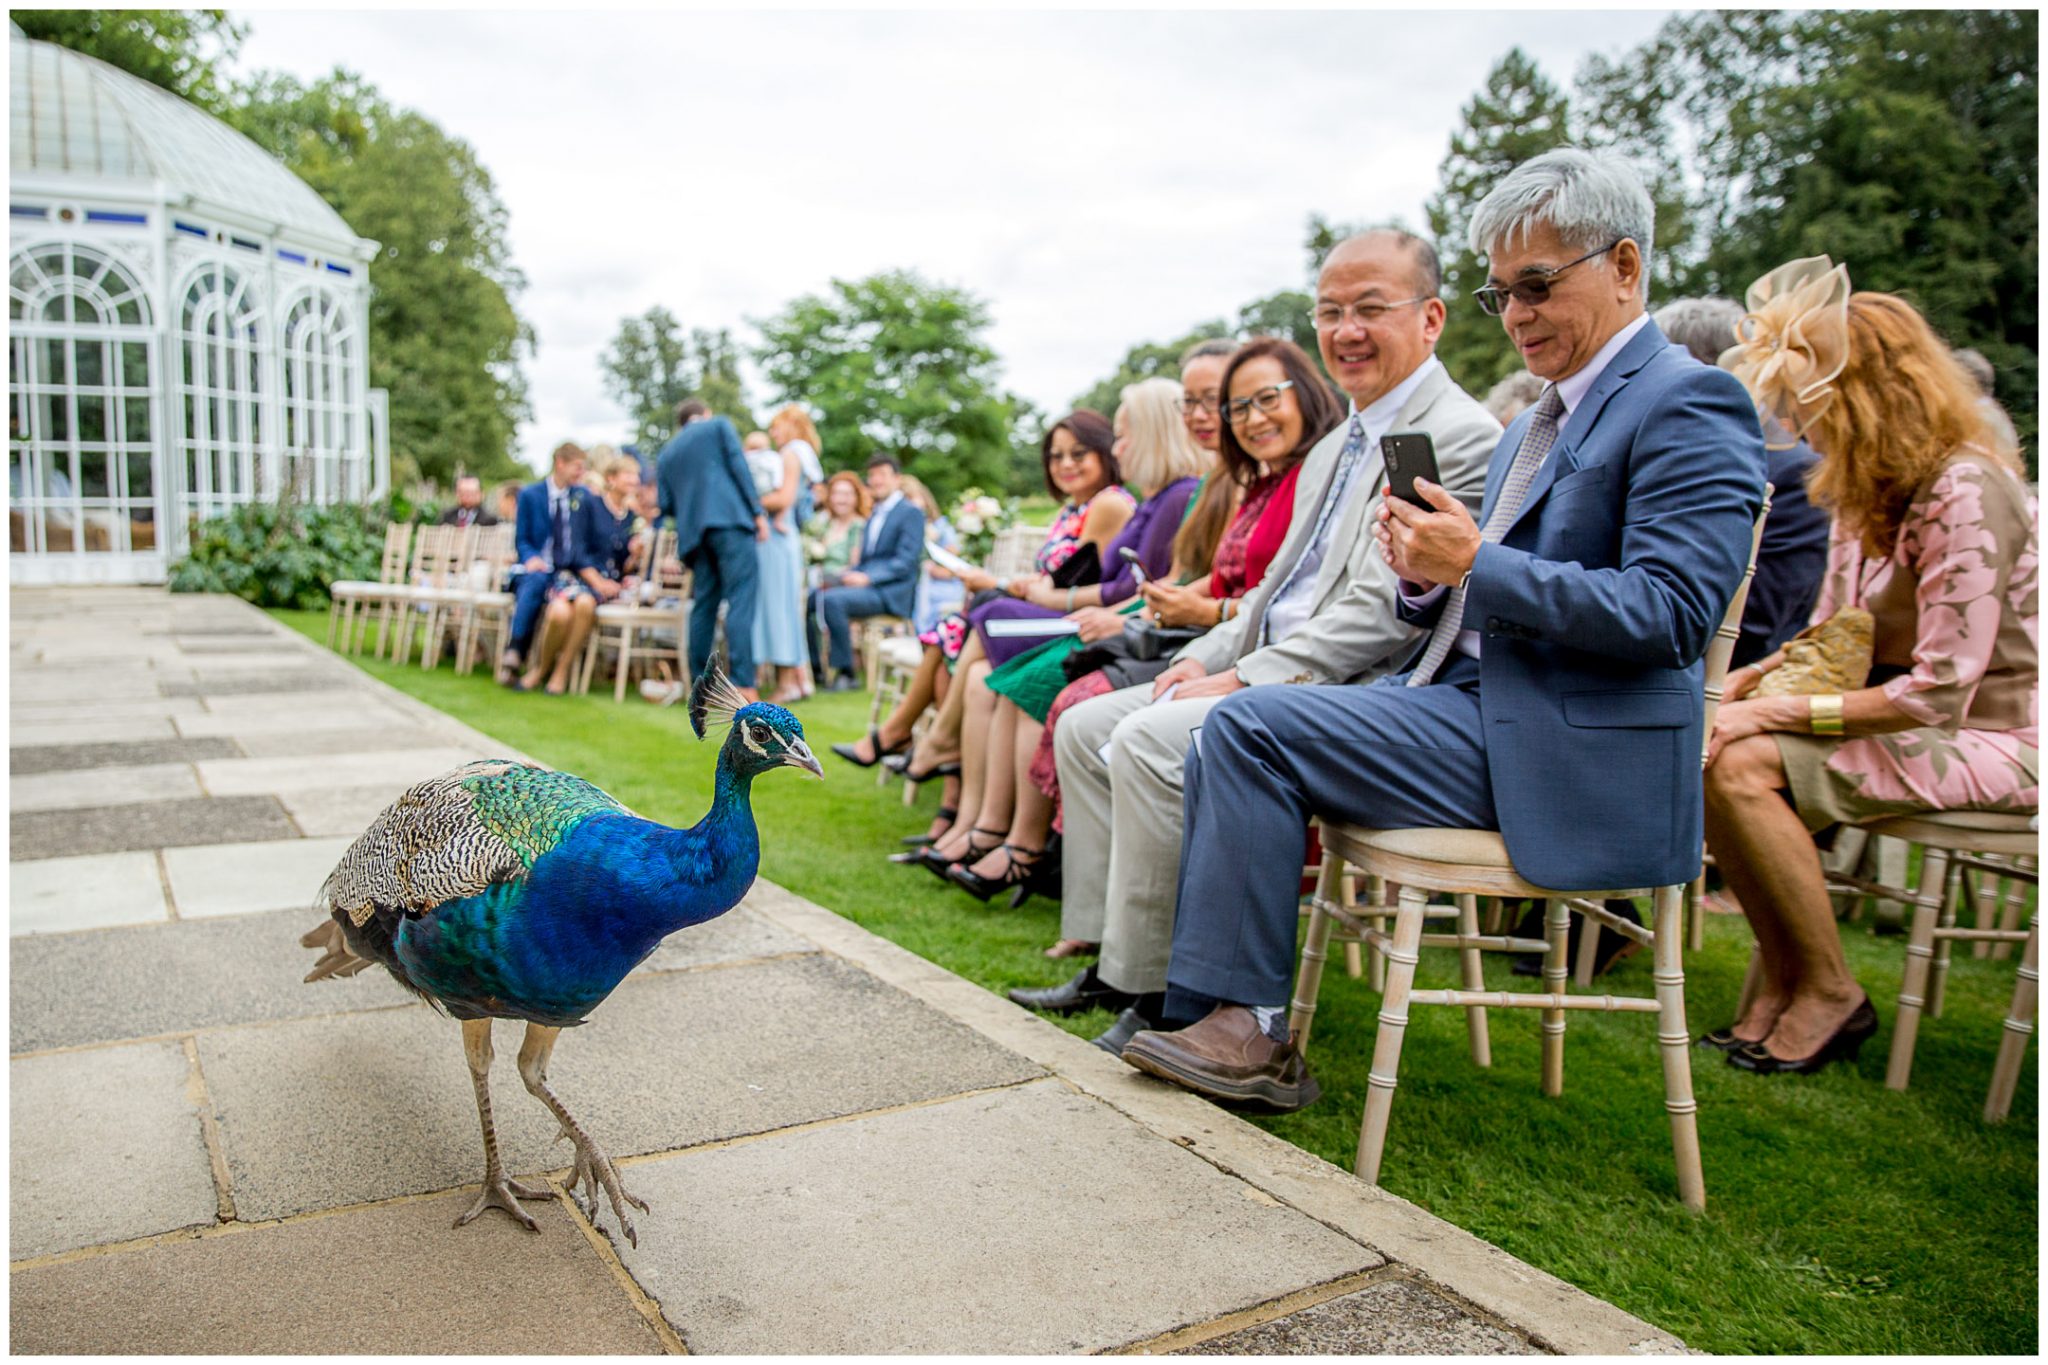 One of the venue's resident peacocks makes an appearance during the wedding ceremony